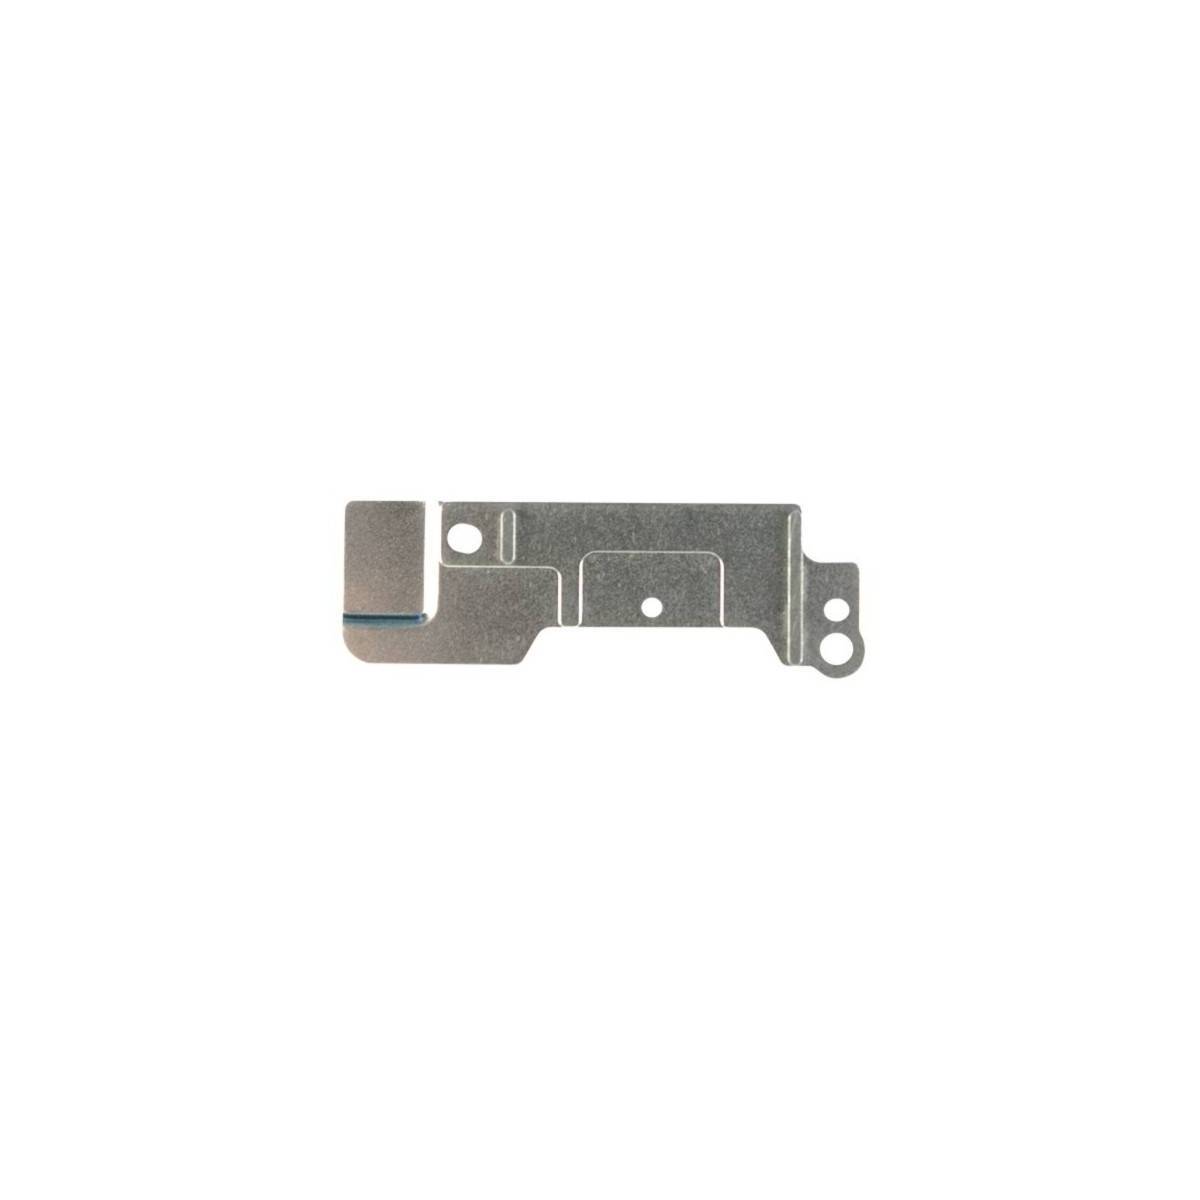 Support bouton home iPhone 6 et 6 Plus